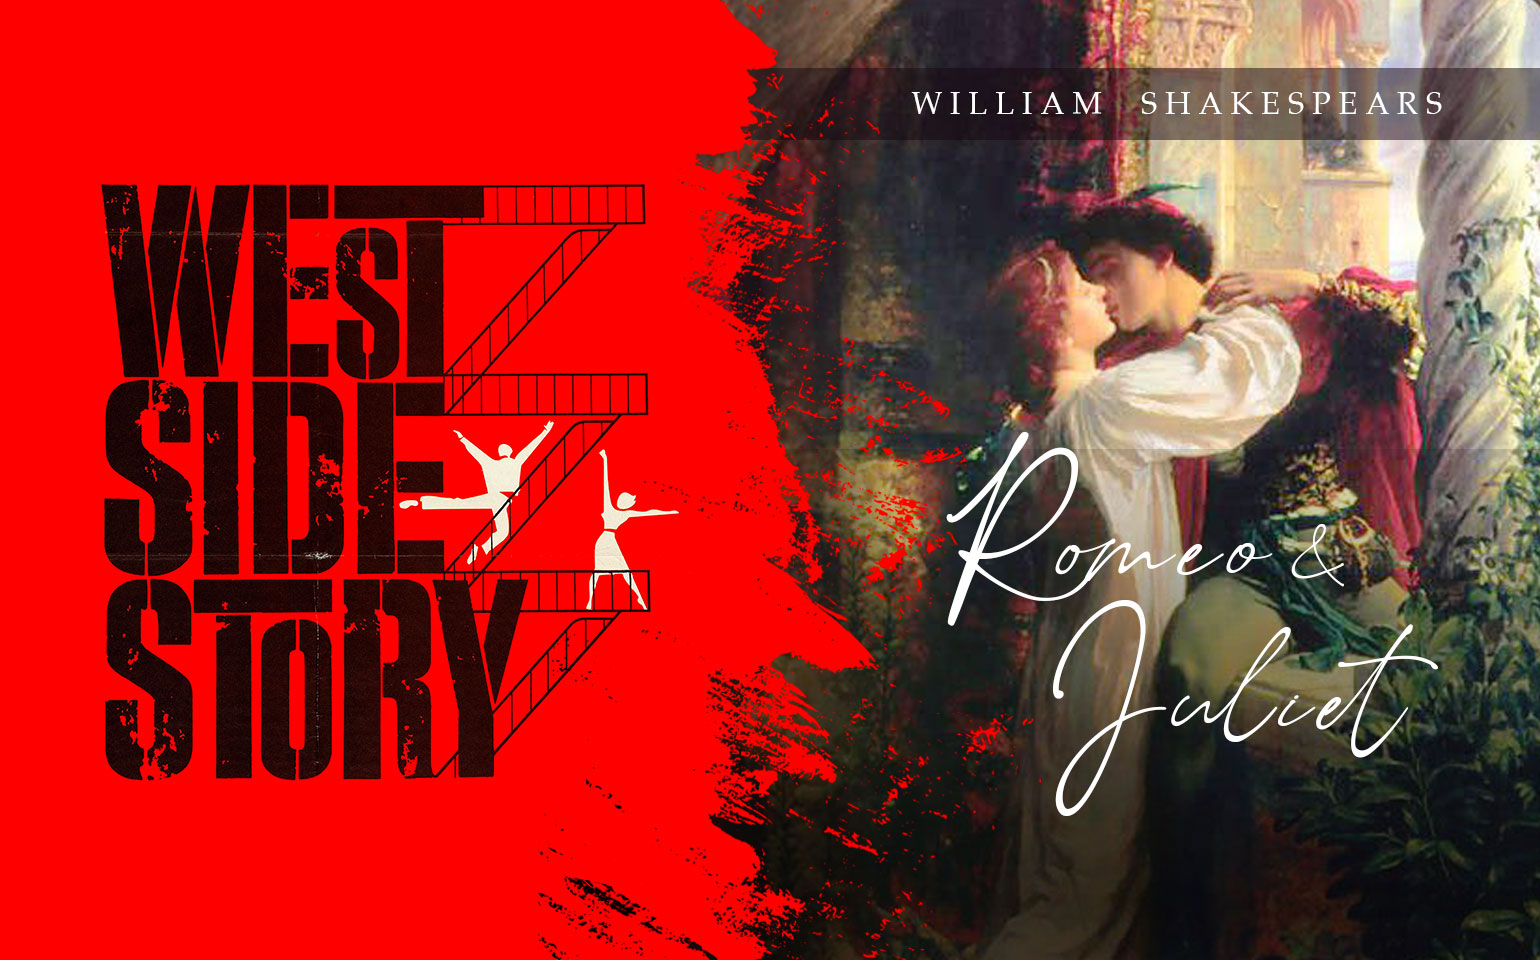 The cover of West Side Story is shown, featured next to the cover of Romeo and Juliet, pictured kissing.